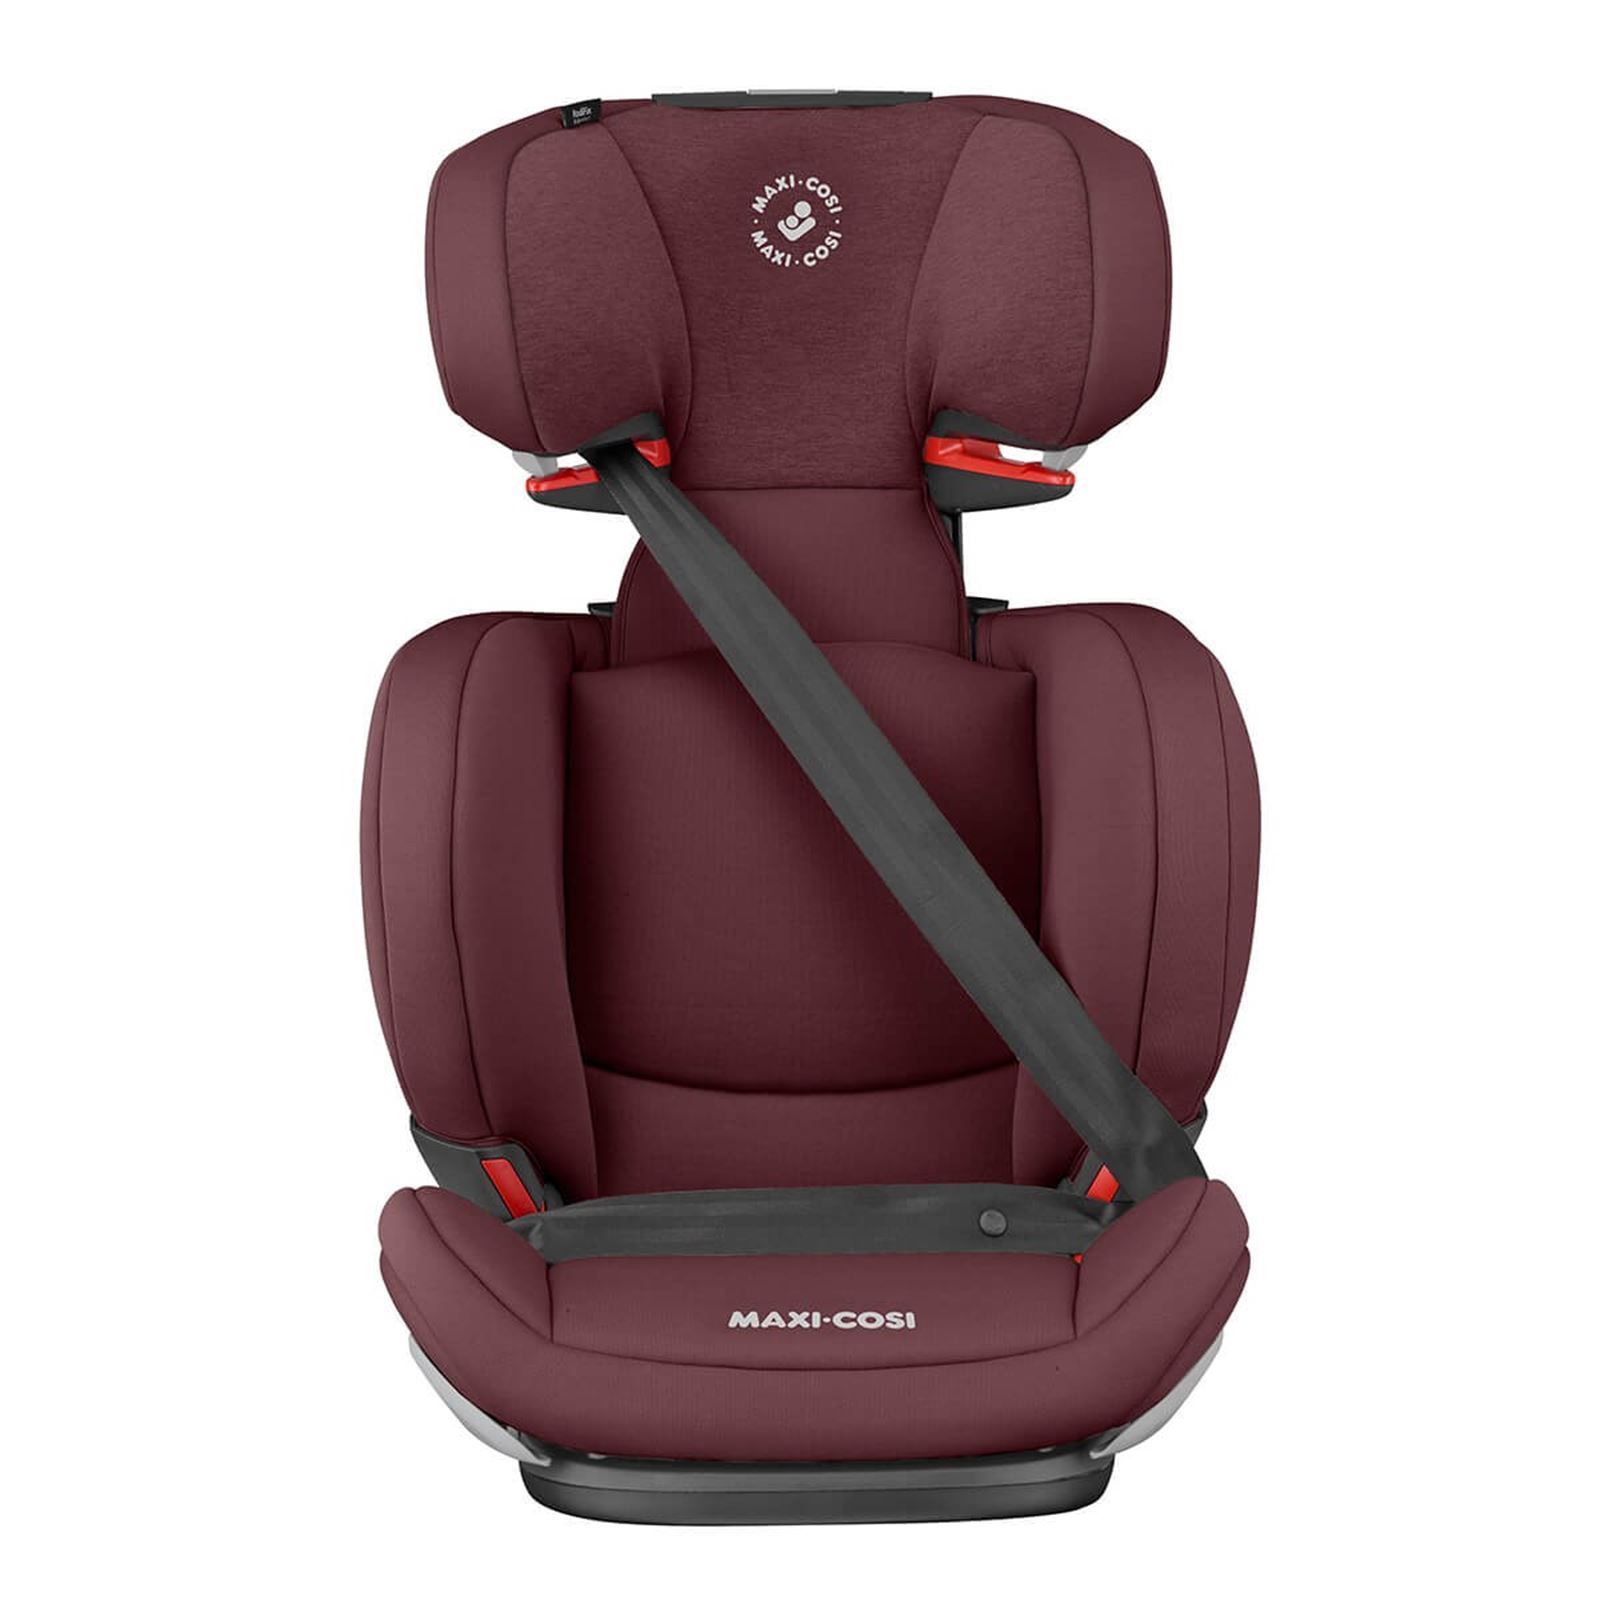 Maxi-Cosi Rodifix AirProtect / Authentic Red